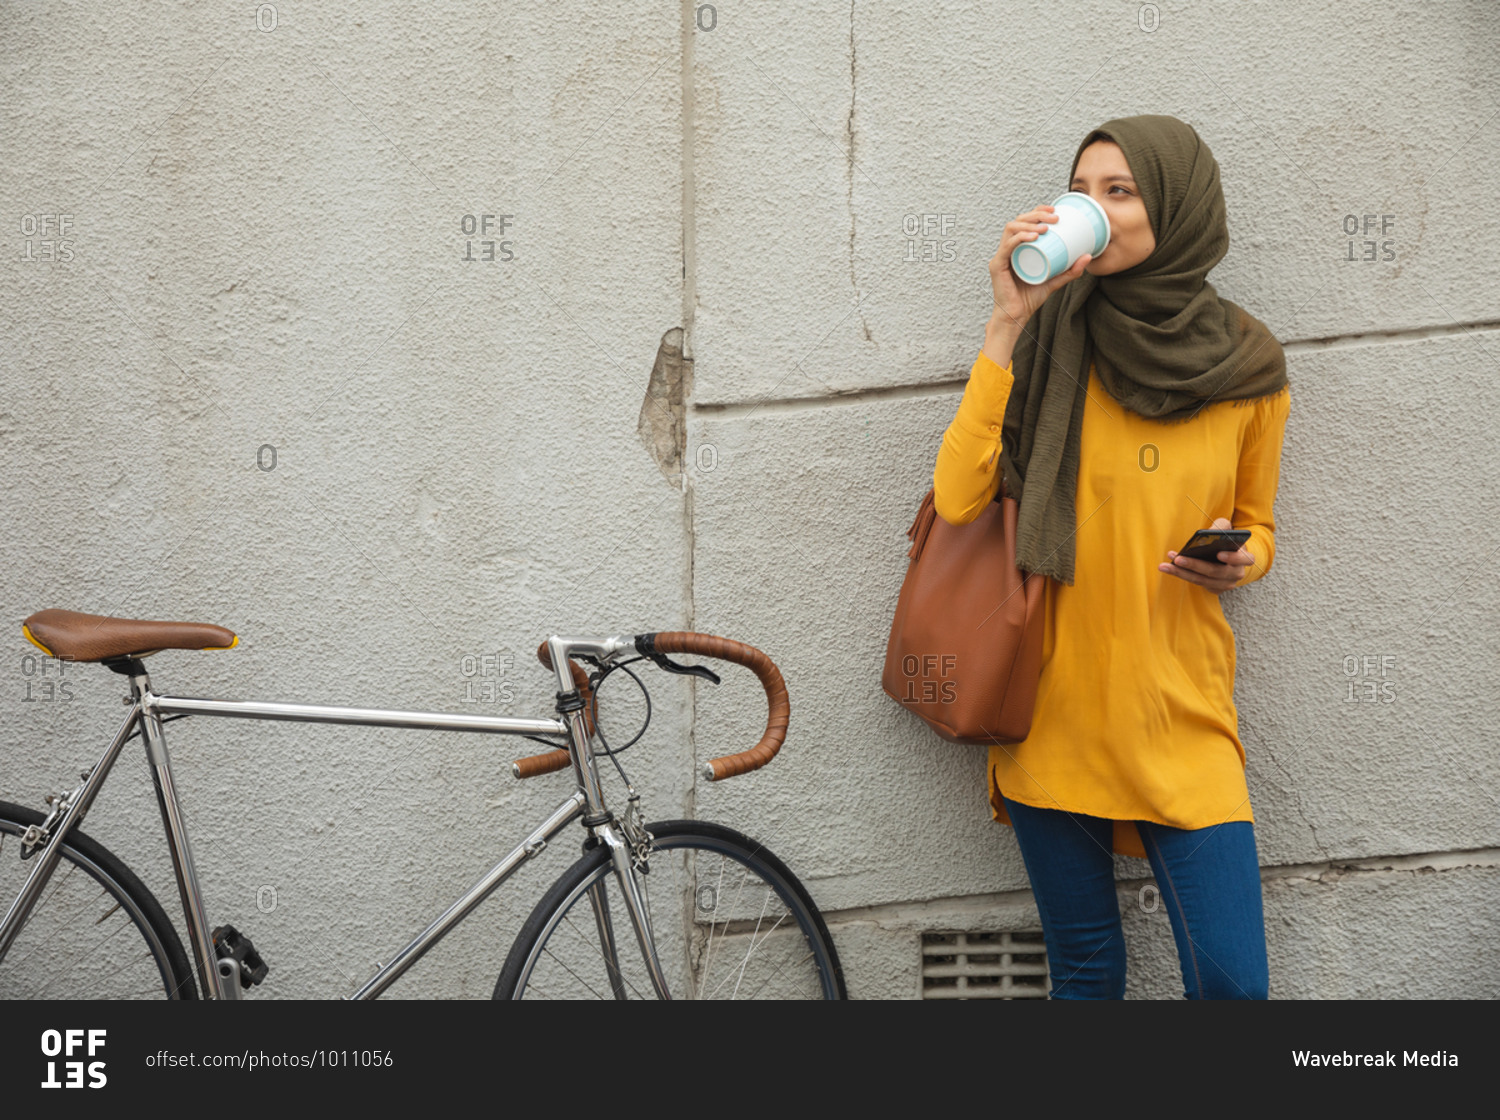 Mixed race woman wearing hijab and yellow jumper out and about in the city, standing by wall drinking takeaway coffee holding smartphone bike next to her. Commuter modern lifestyle.